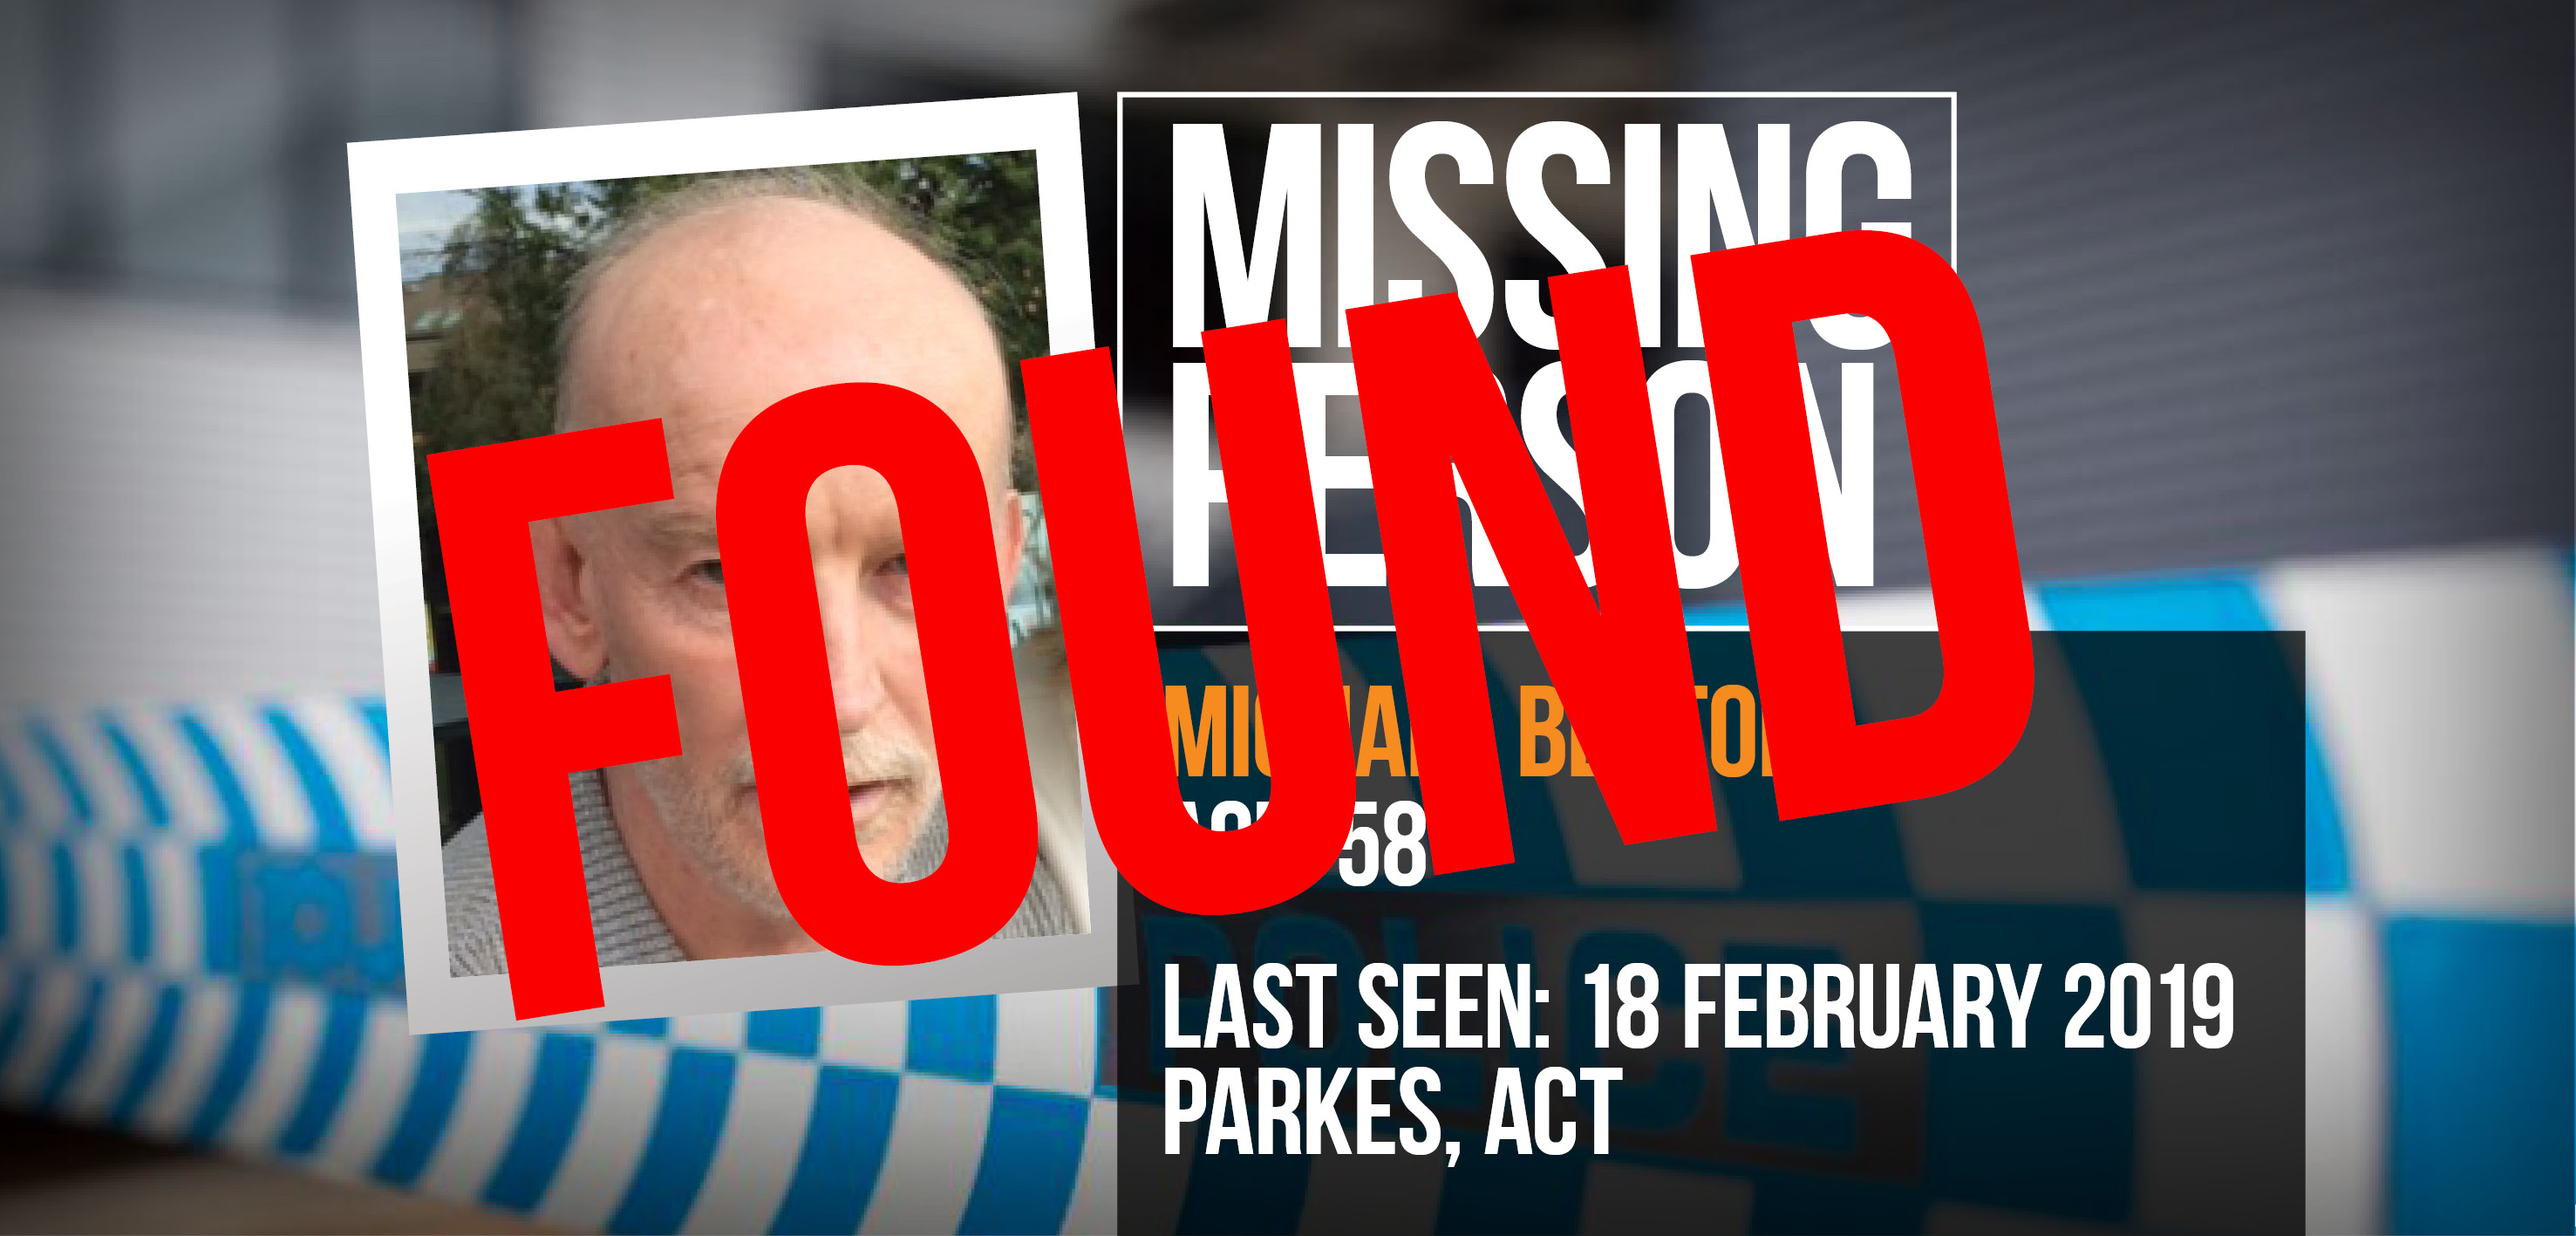 UPDATE Great news Canberra! Michael Beaton has been found safe and well. FOUND